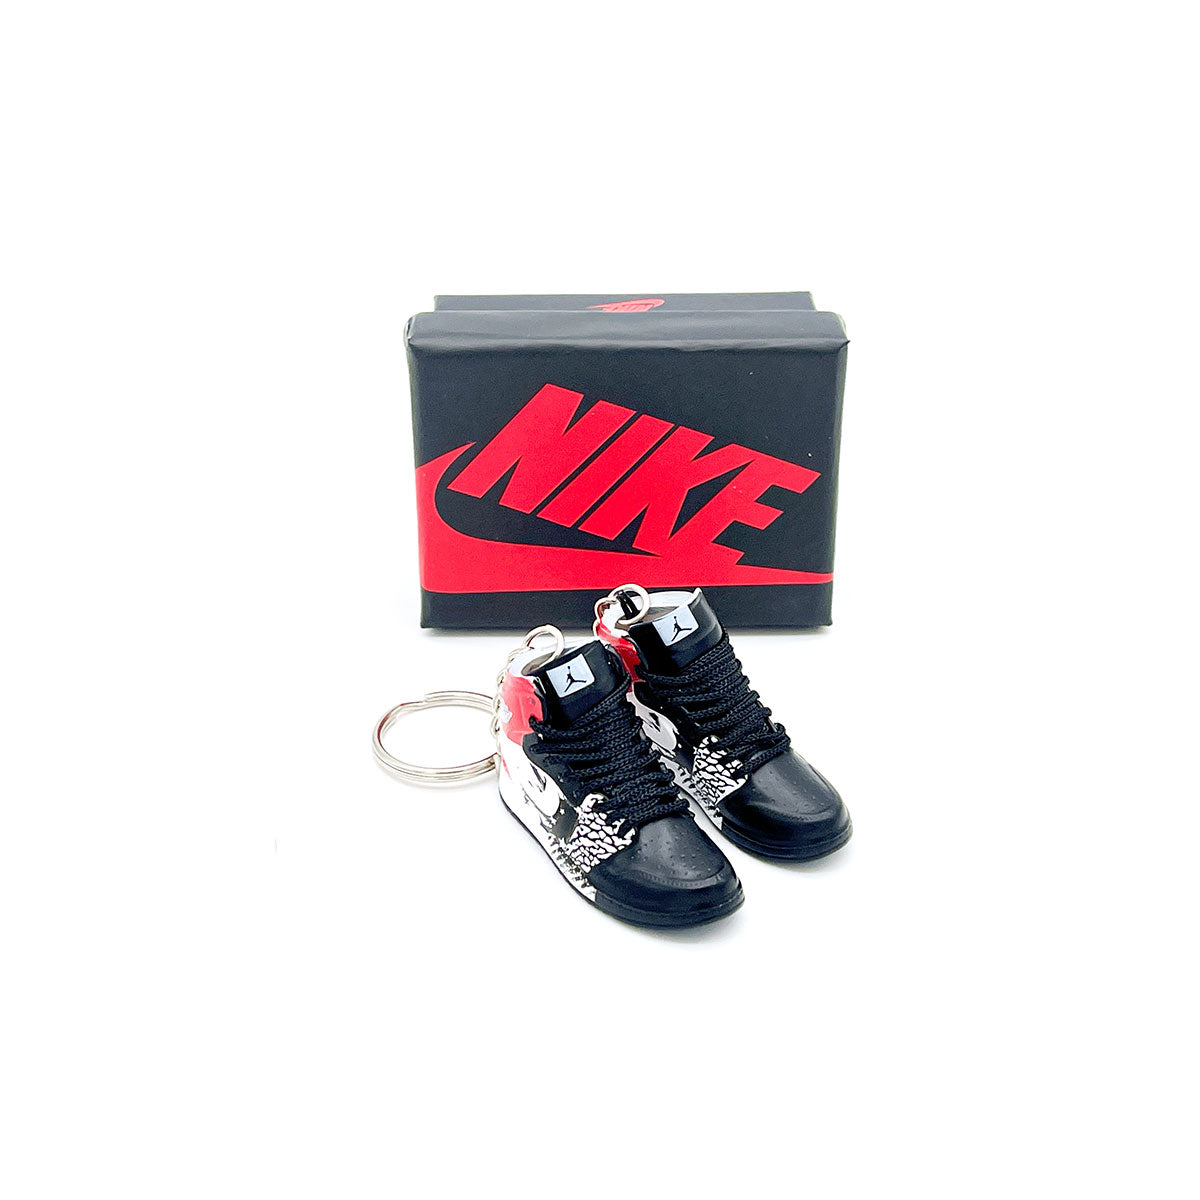 3D Sneaker Keychain- Air Jordan 1 High Dave White Wings for the Future Pair